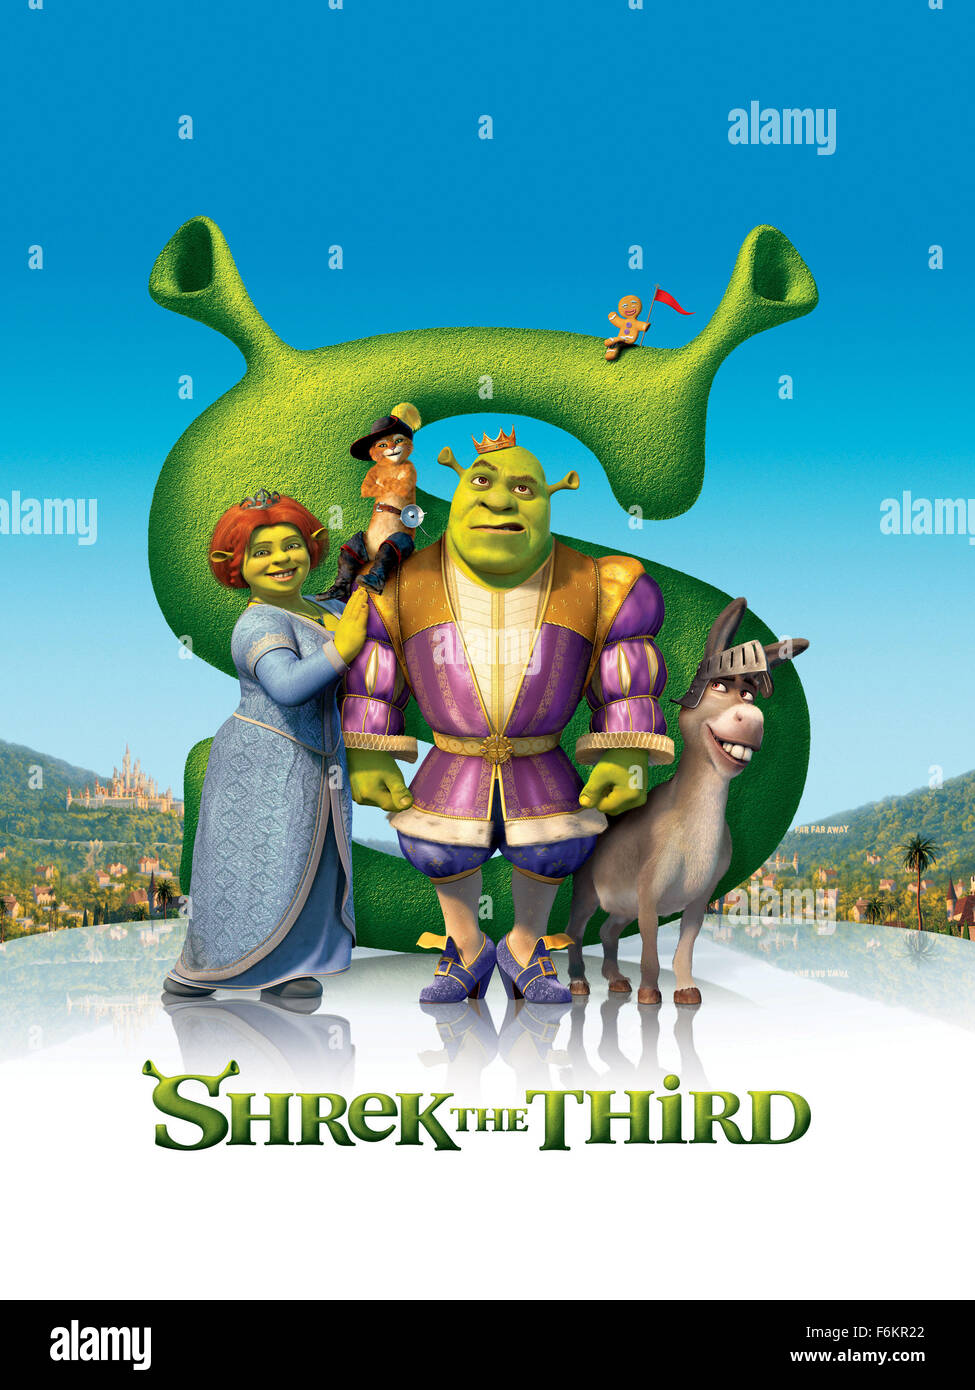 RELEASE DATE: May 18, 2007. MOVIE TITLE: Shrek the Third - STUDIO: PDI / DreamWorks Productions. PLOT: When his new father-in-law, King Harold (Cleese) falls ill, Shrek (Myers) is looked at as the heir to the land of Far, Far Away. Not one to give up his beloved swamp, Shrek recruits his friends Donkey (Murphy) and Puss in Boots (Banderas) to install the rebellious Artie (Timberlake) as the new king. Princess Fiona (Diaz), however, rallies a band of royal girlfriends to fends off a coup d'etat by the jilted Prince Charming (Everett). PICTURED: Composite art for the Movie poster featuring MIKE Stock Photo